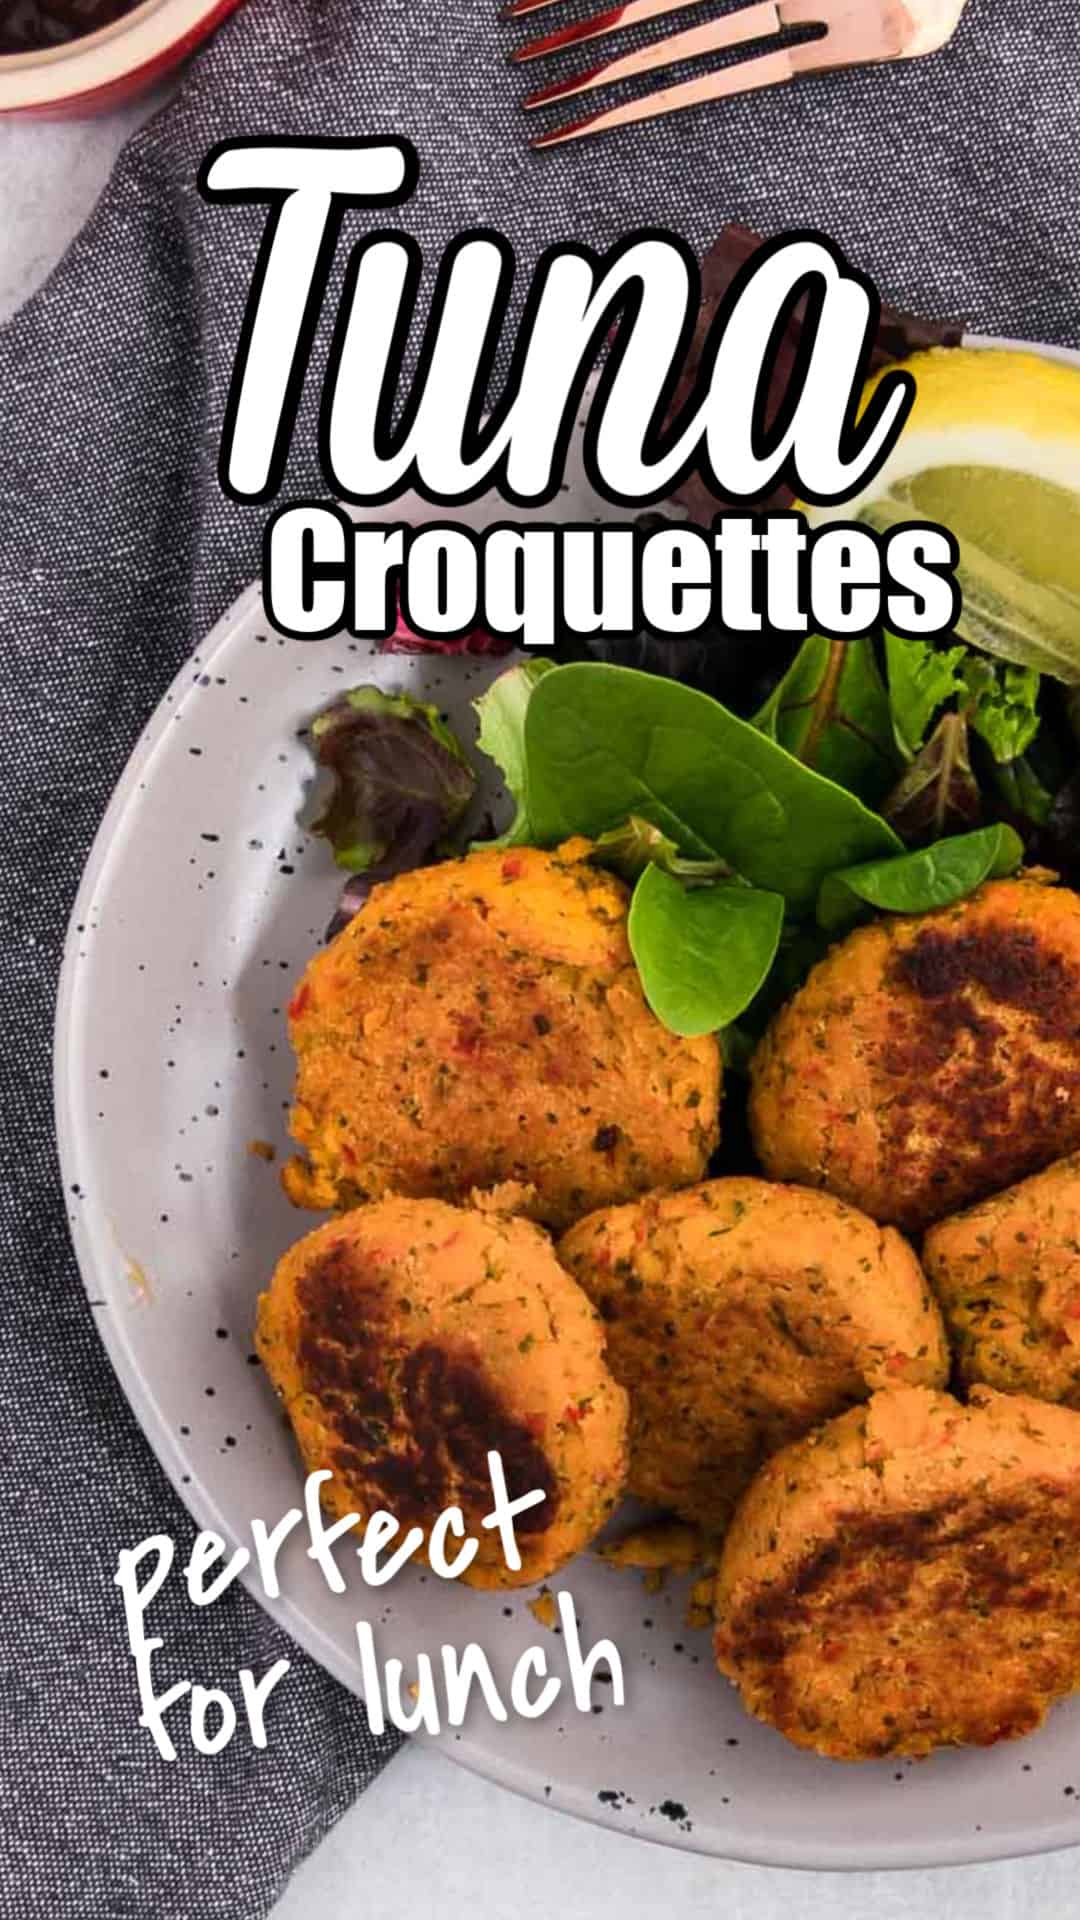 Tuna croquettes are crispy, bright, and colorful on the outside and full of flavor on the inside. #cheerfulcook #tuna #croquettes #recipe #lunch ♡ cheerfulcook.com via @cheerfulcook